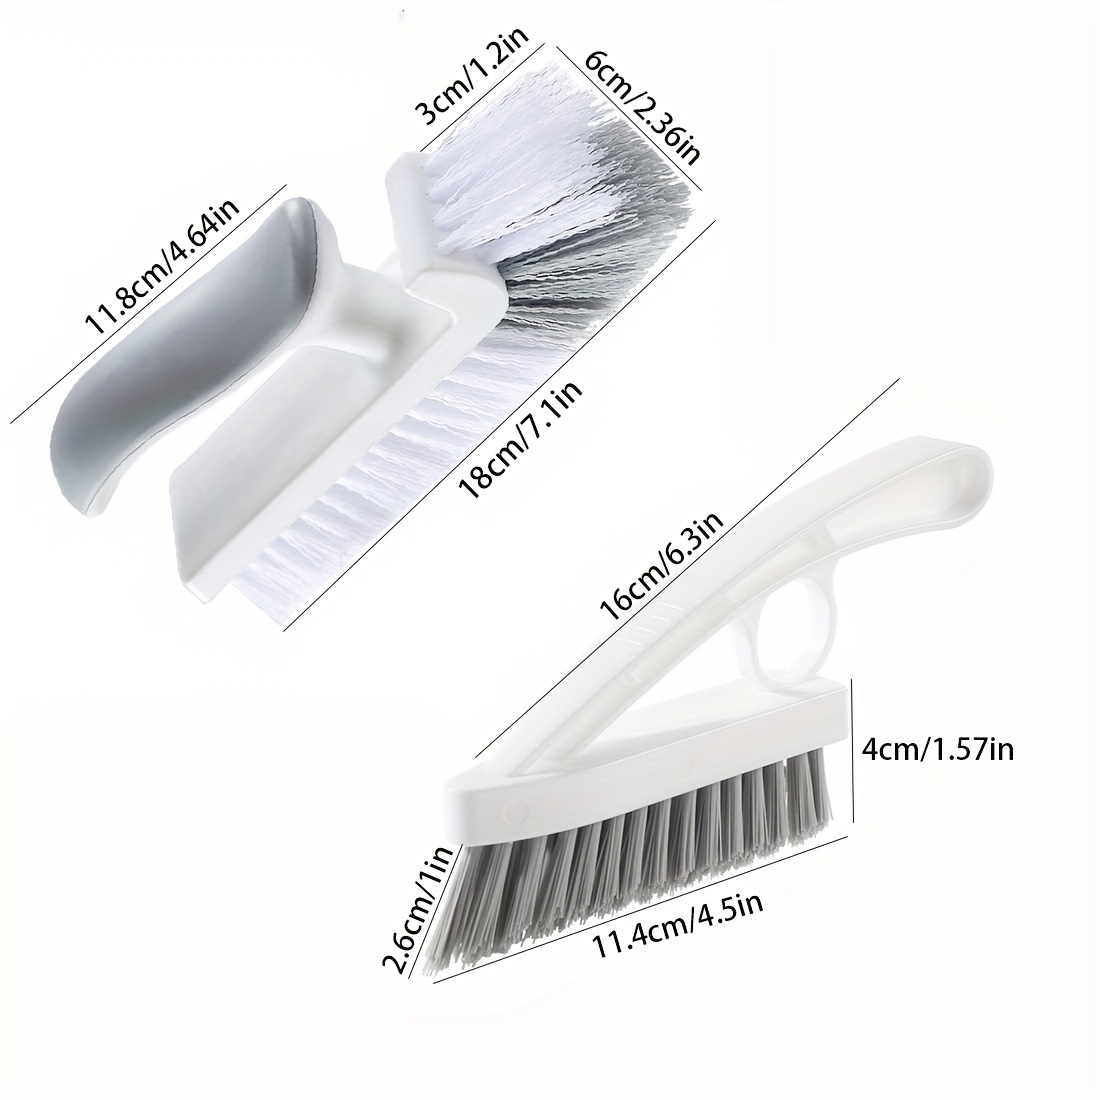 NEW Hard-Bristled Crevice Cleaning Brush Grout Cleaner Scrub Brush